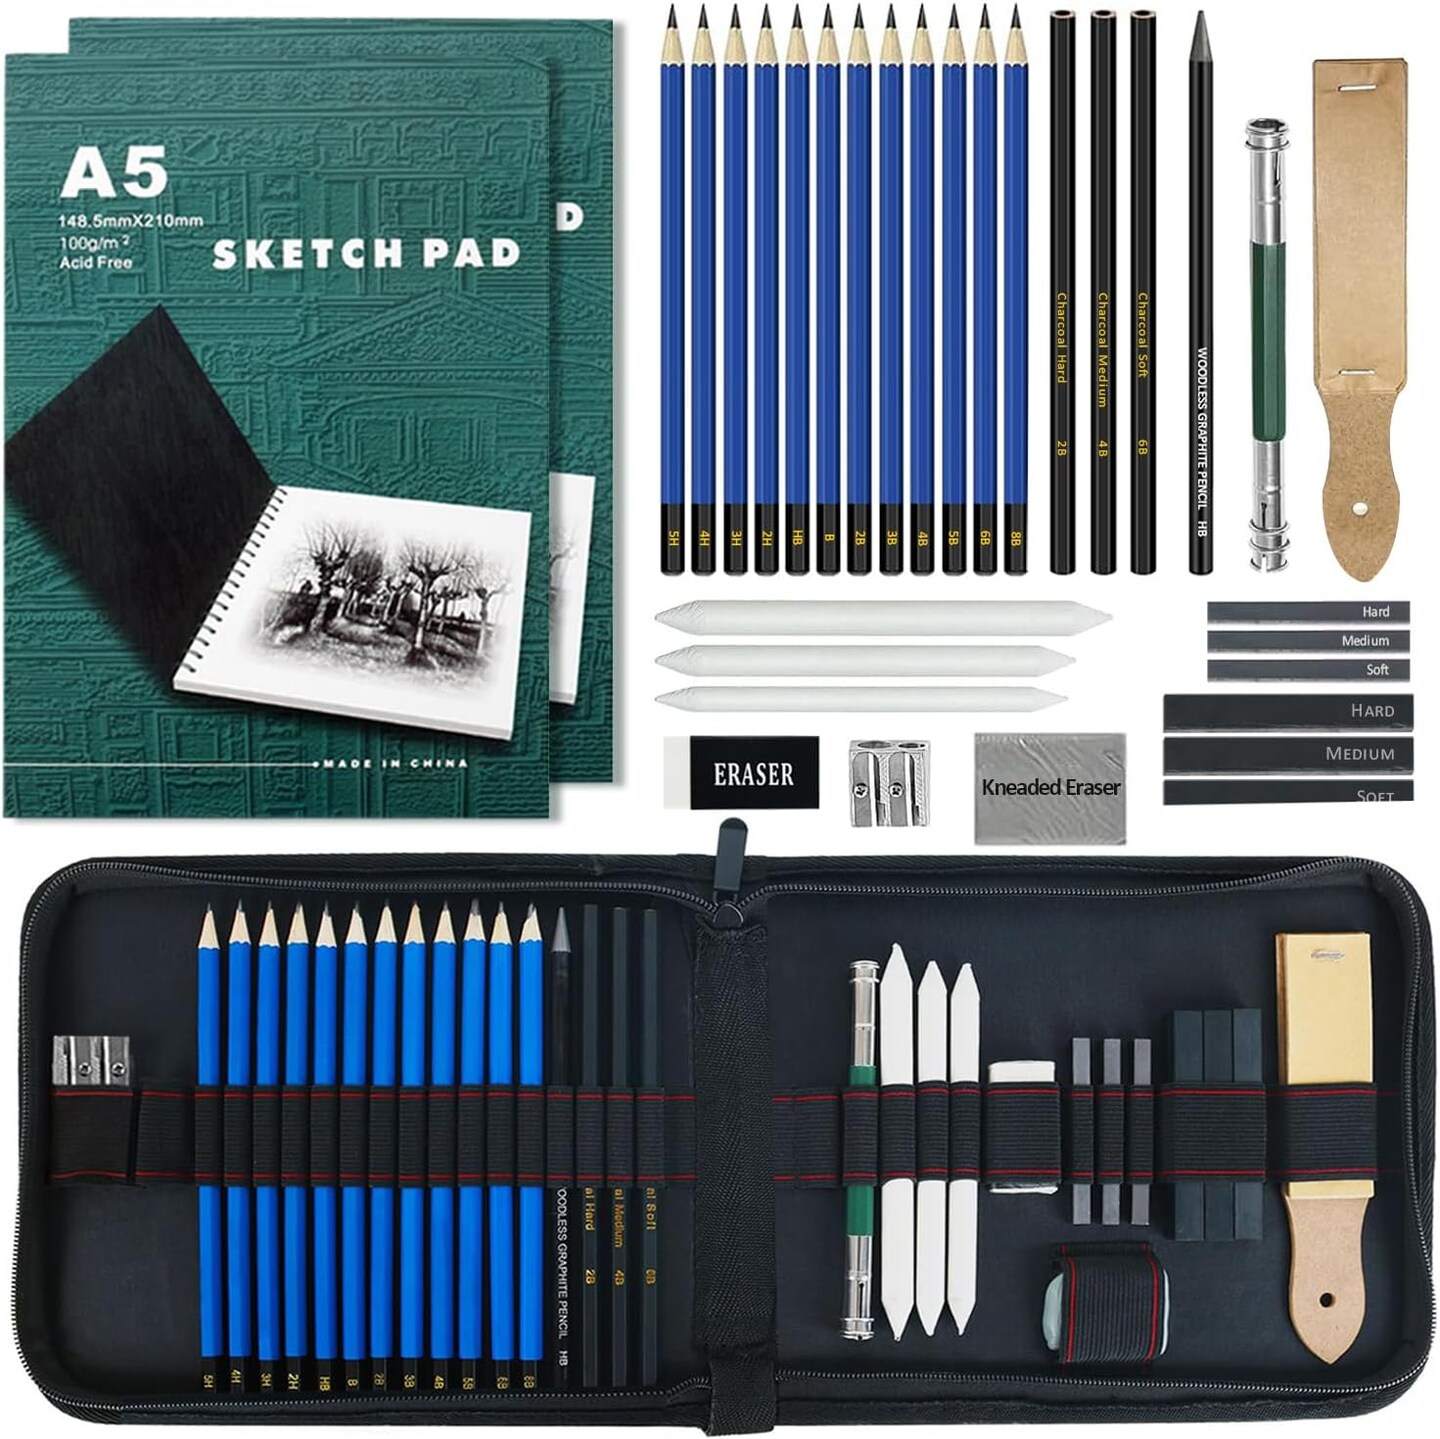 Drawing Set - Sketching Kit, 55 Pieces Art Supplies for Adults with Sketching, Graphite, and Charcoal Pencils, Drawing Supplies Art Kit with Sketchpad for Artists and Beginners